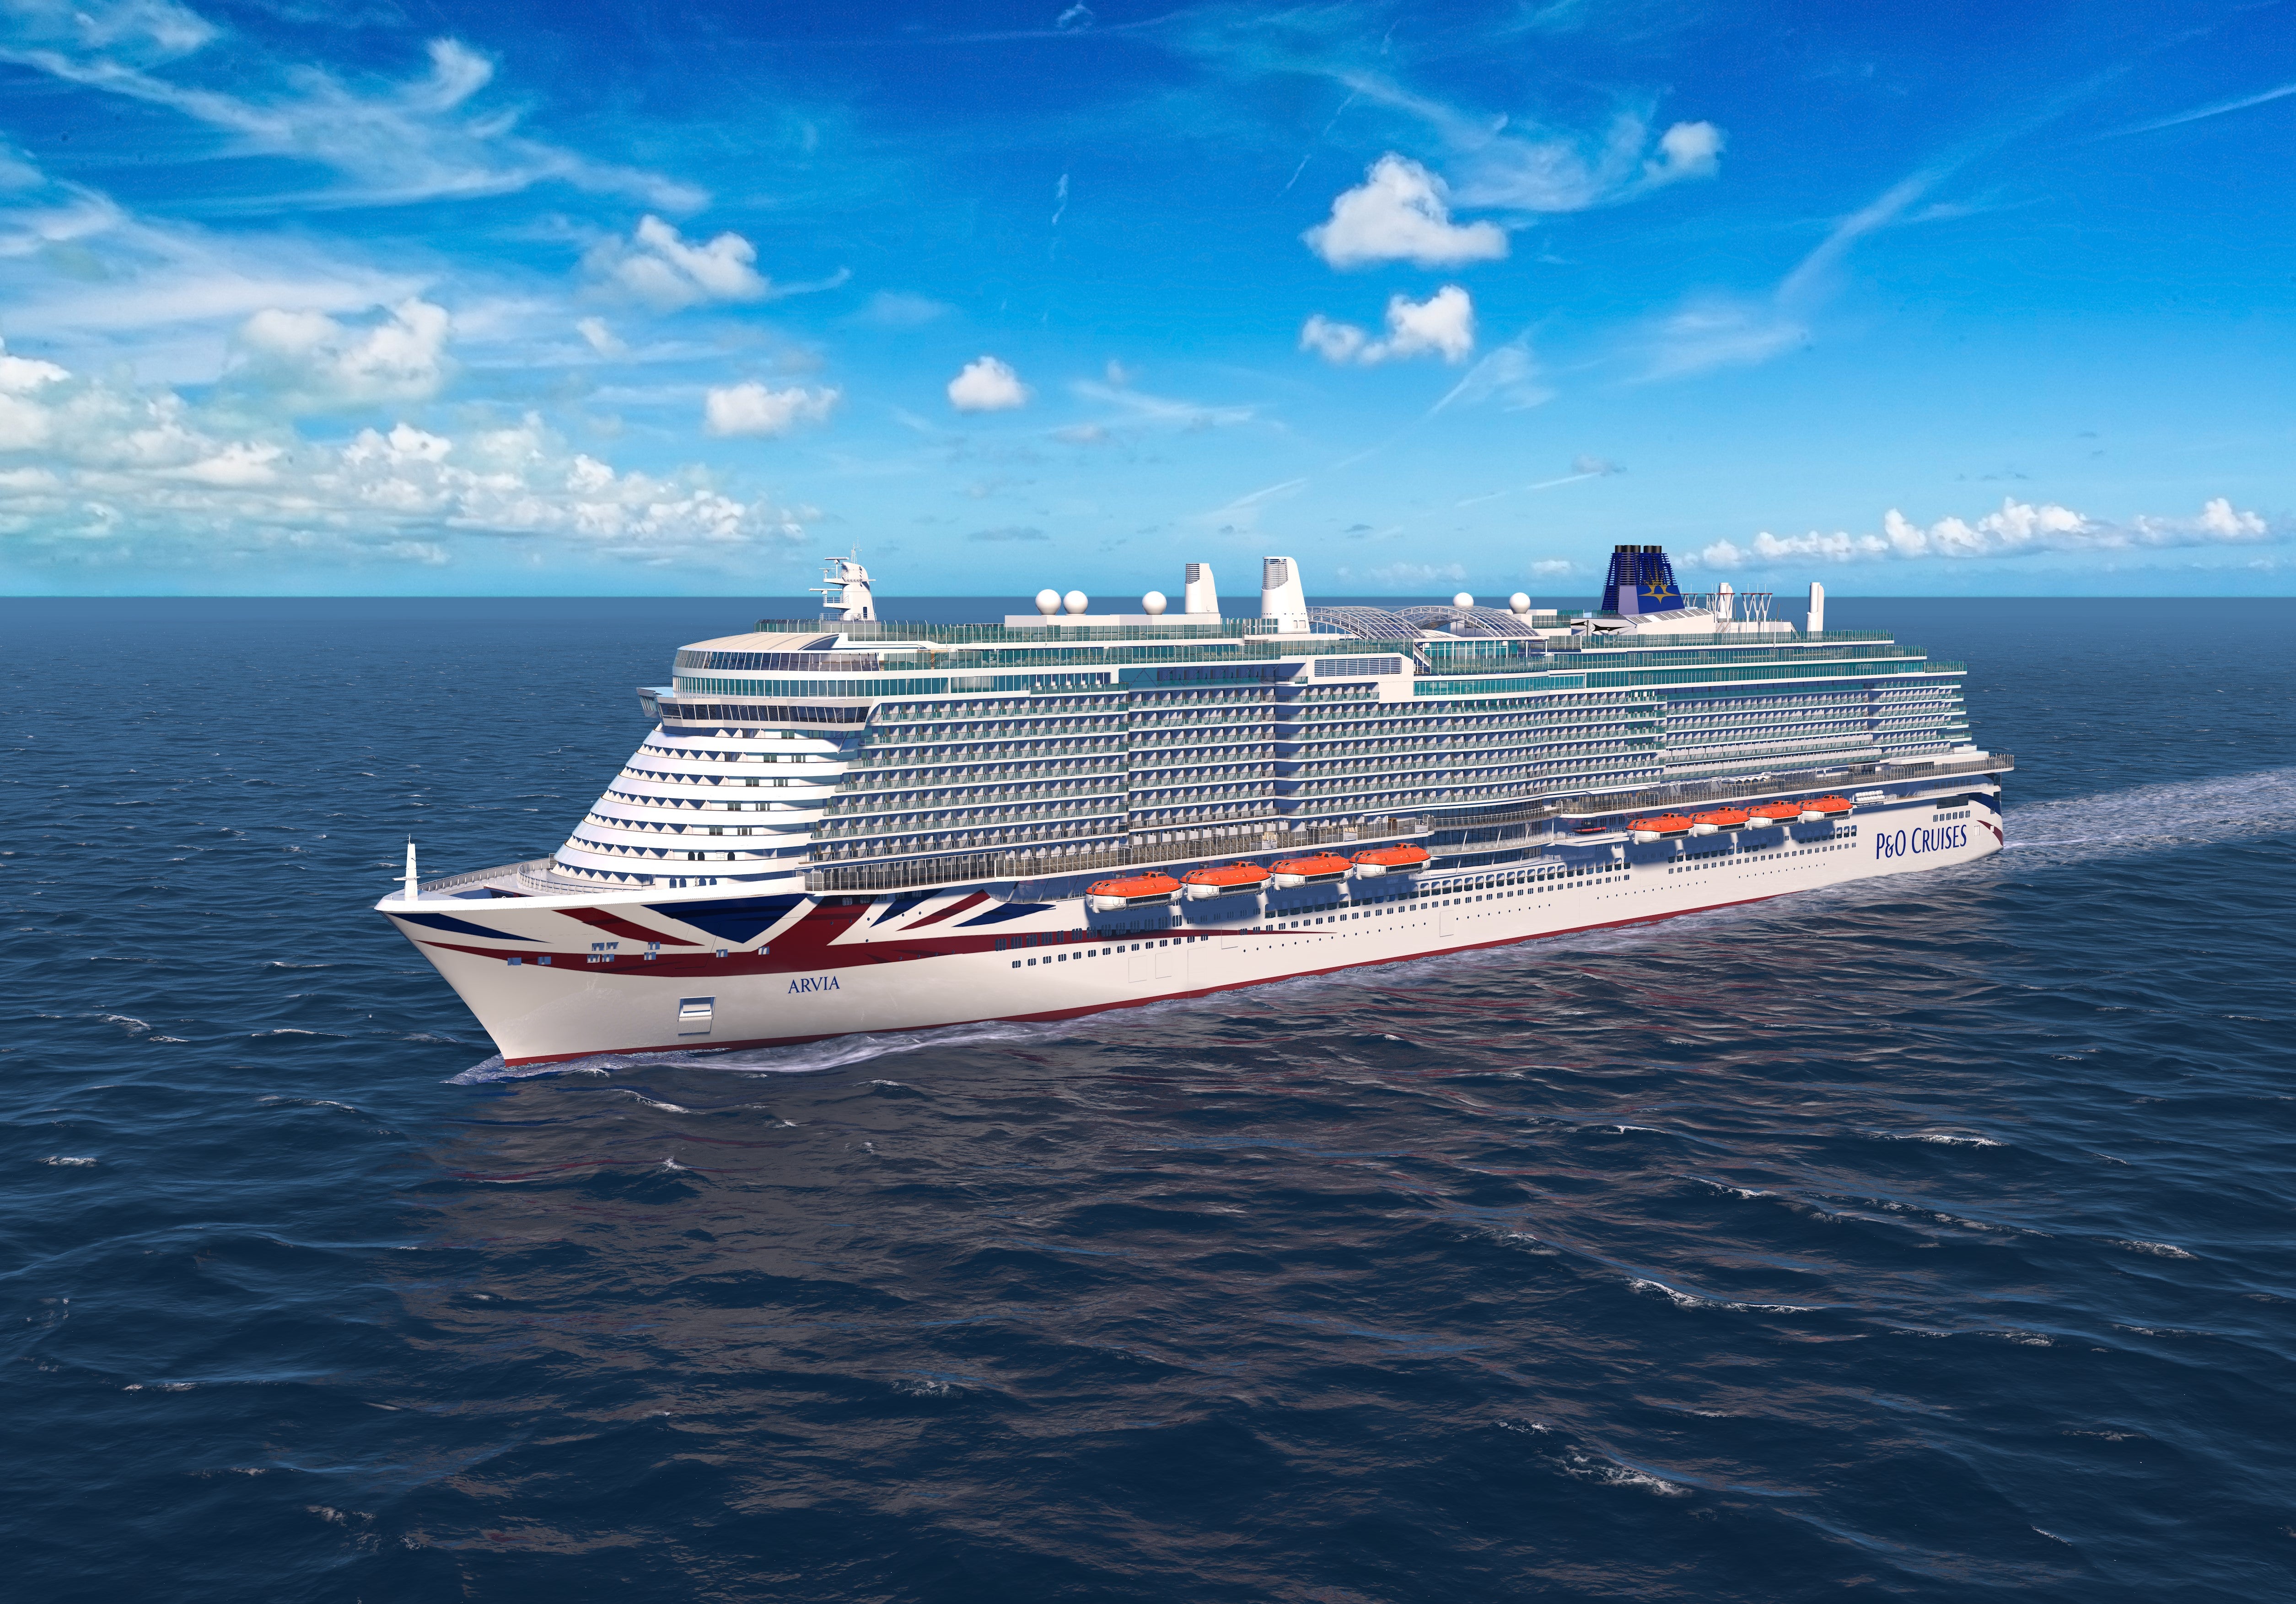 The P&O ship Arvia launched this month